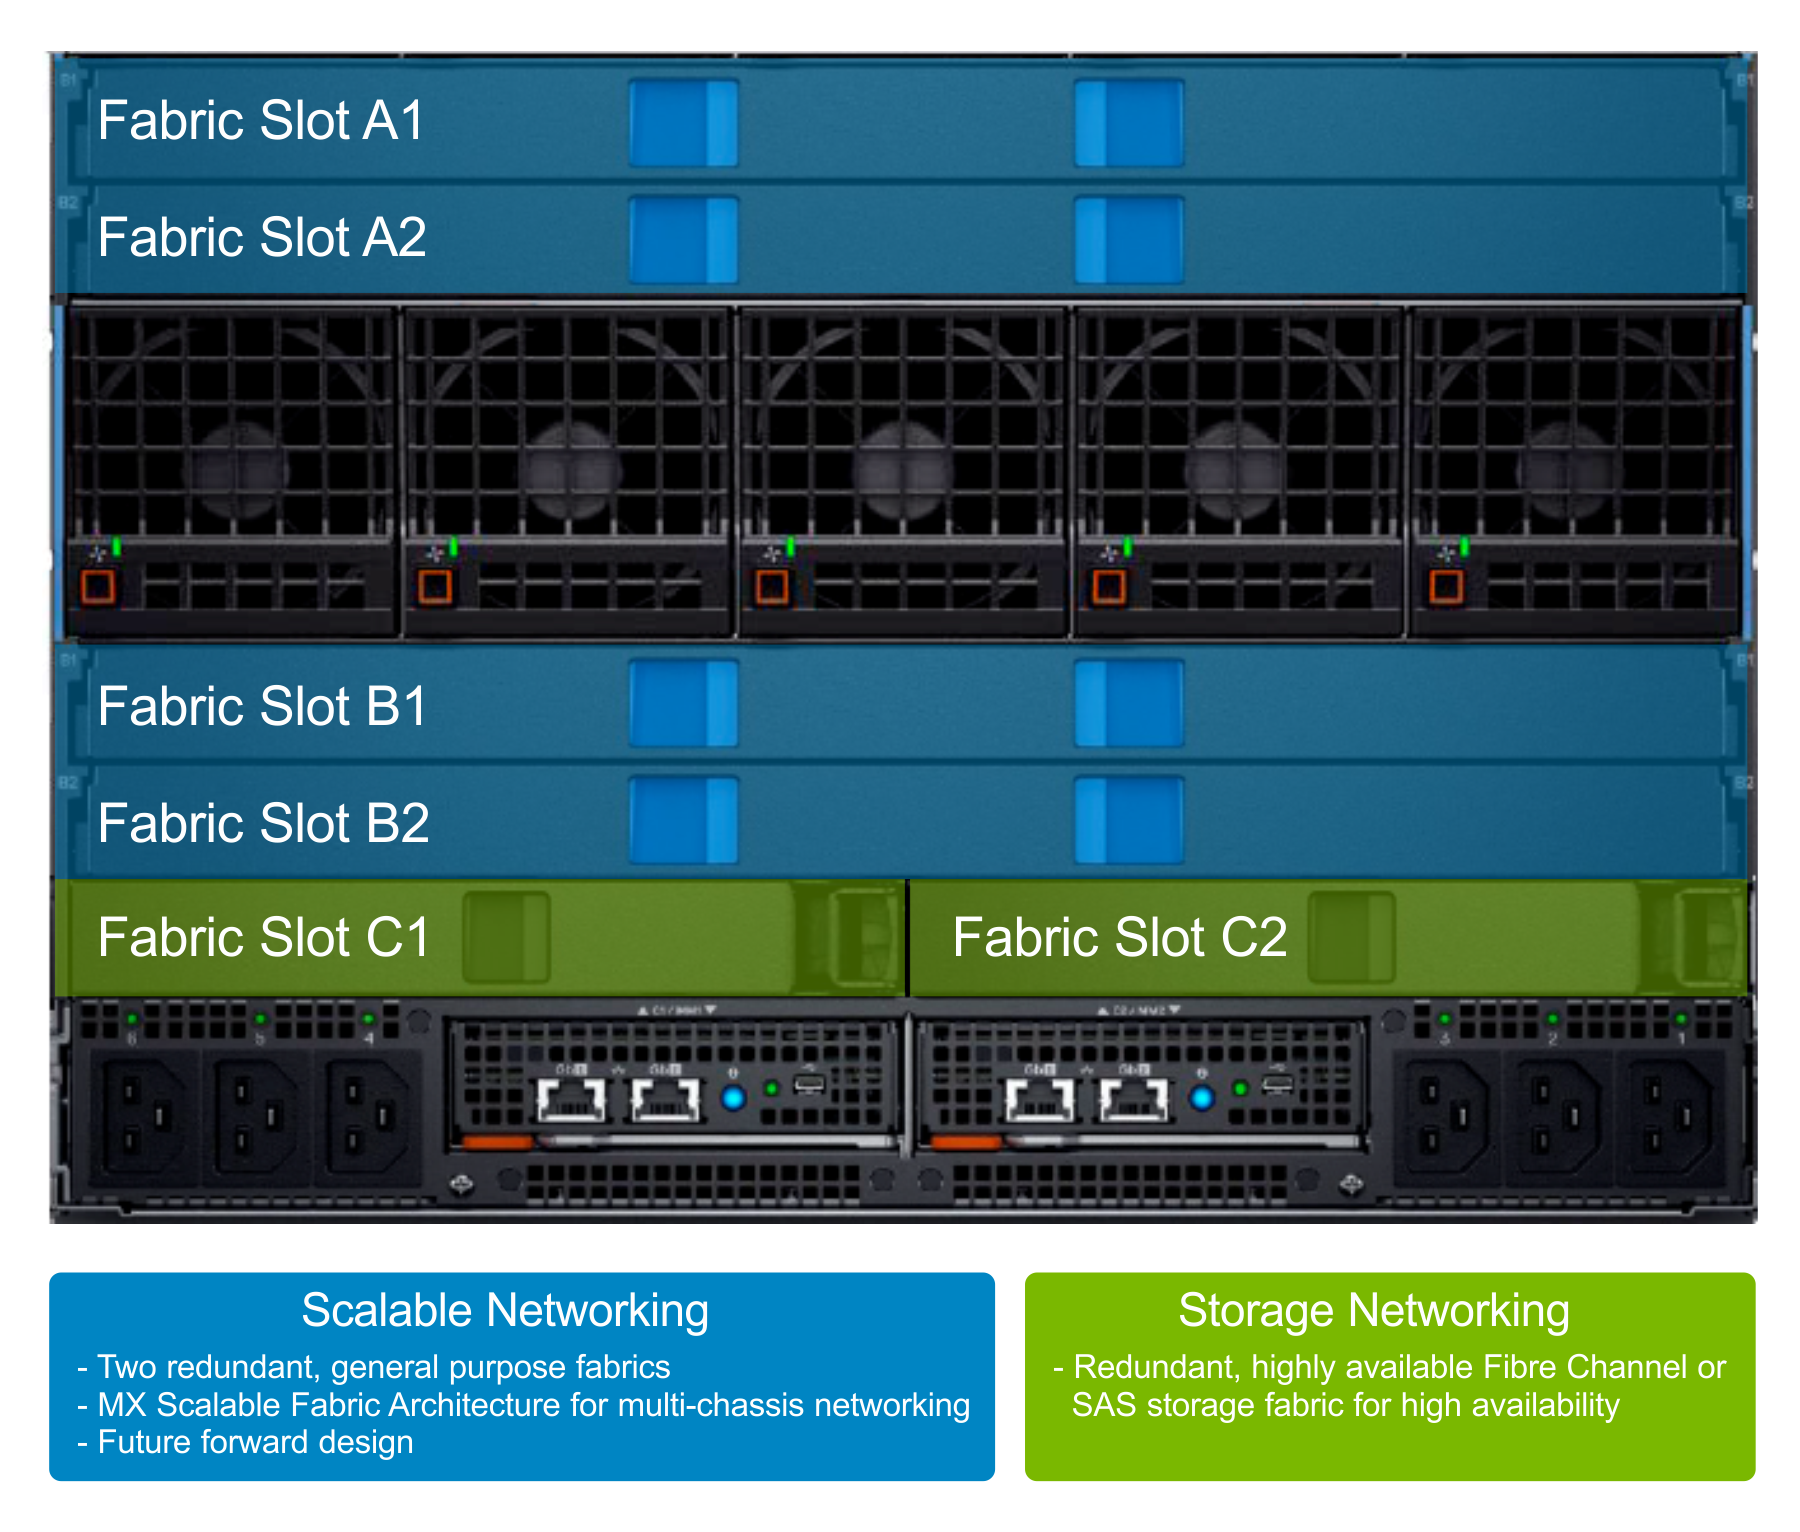 The image shows the the logical view of PowerEdge MX7000 chassis.